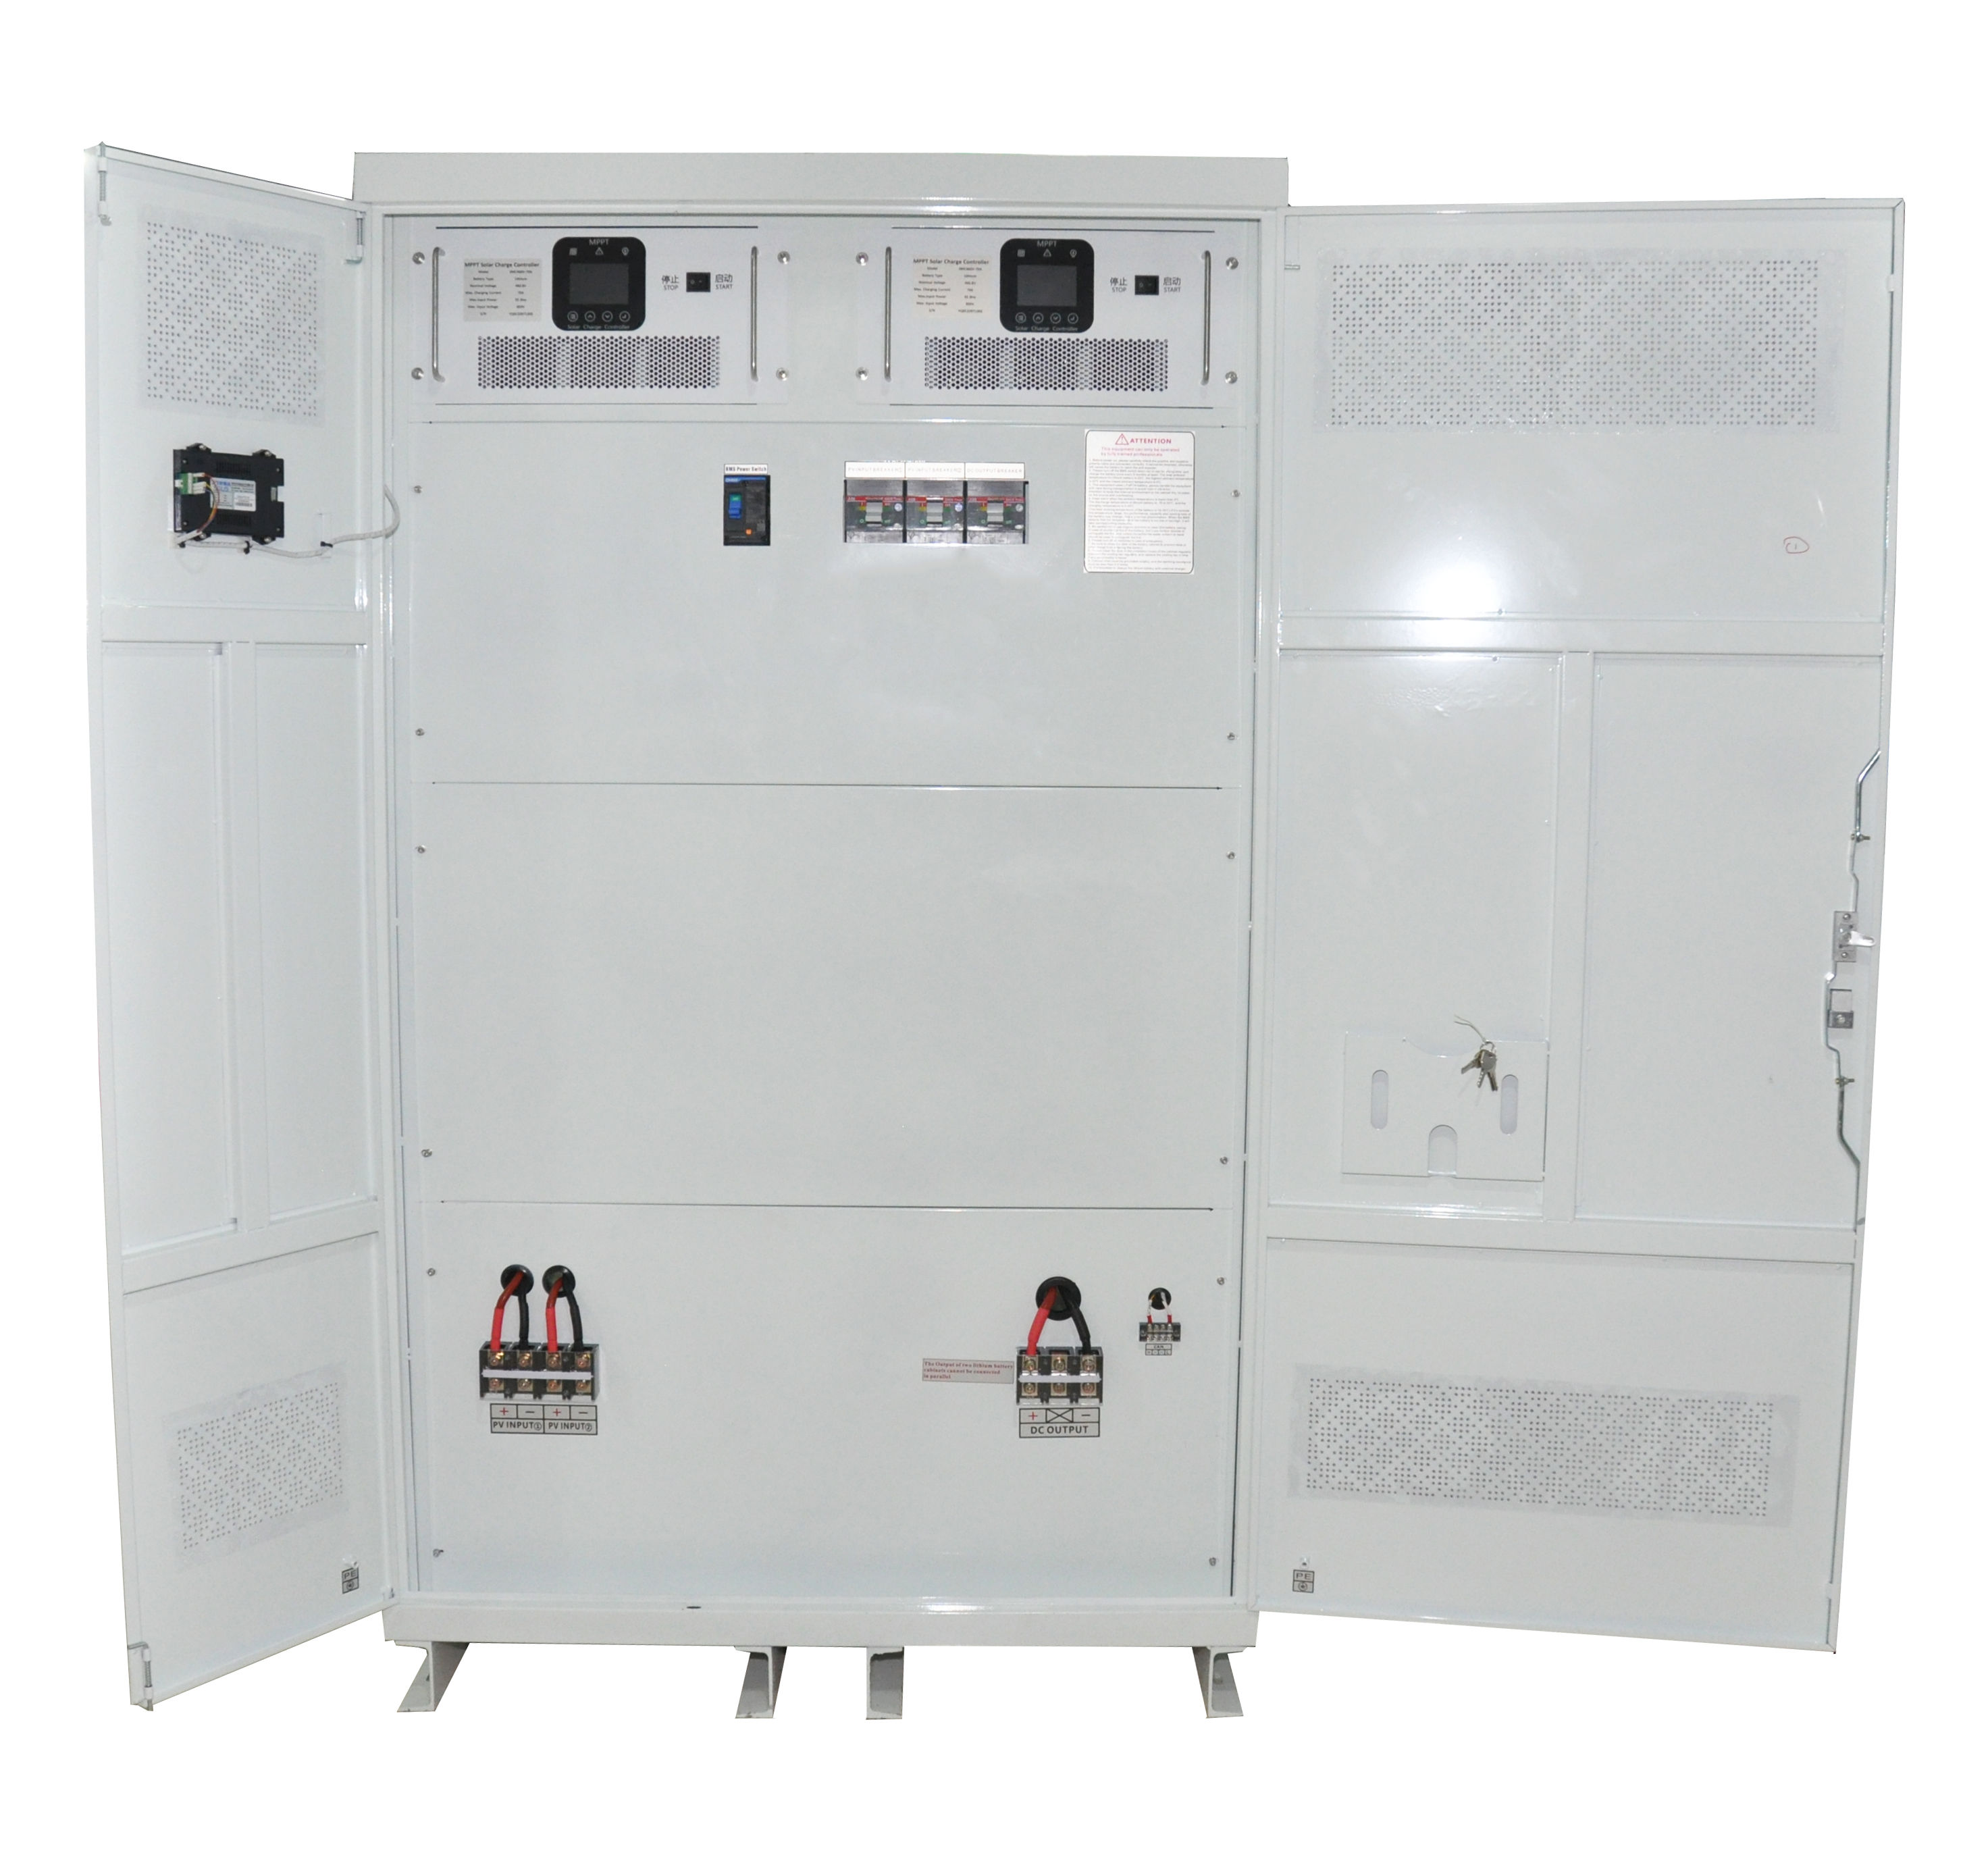 600KWH LiFePO4 Lithium ion Battery with BMS System